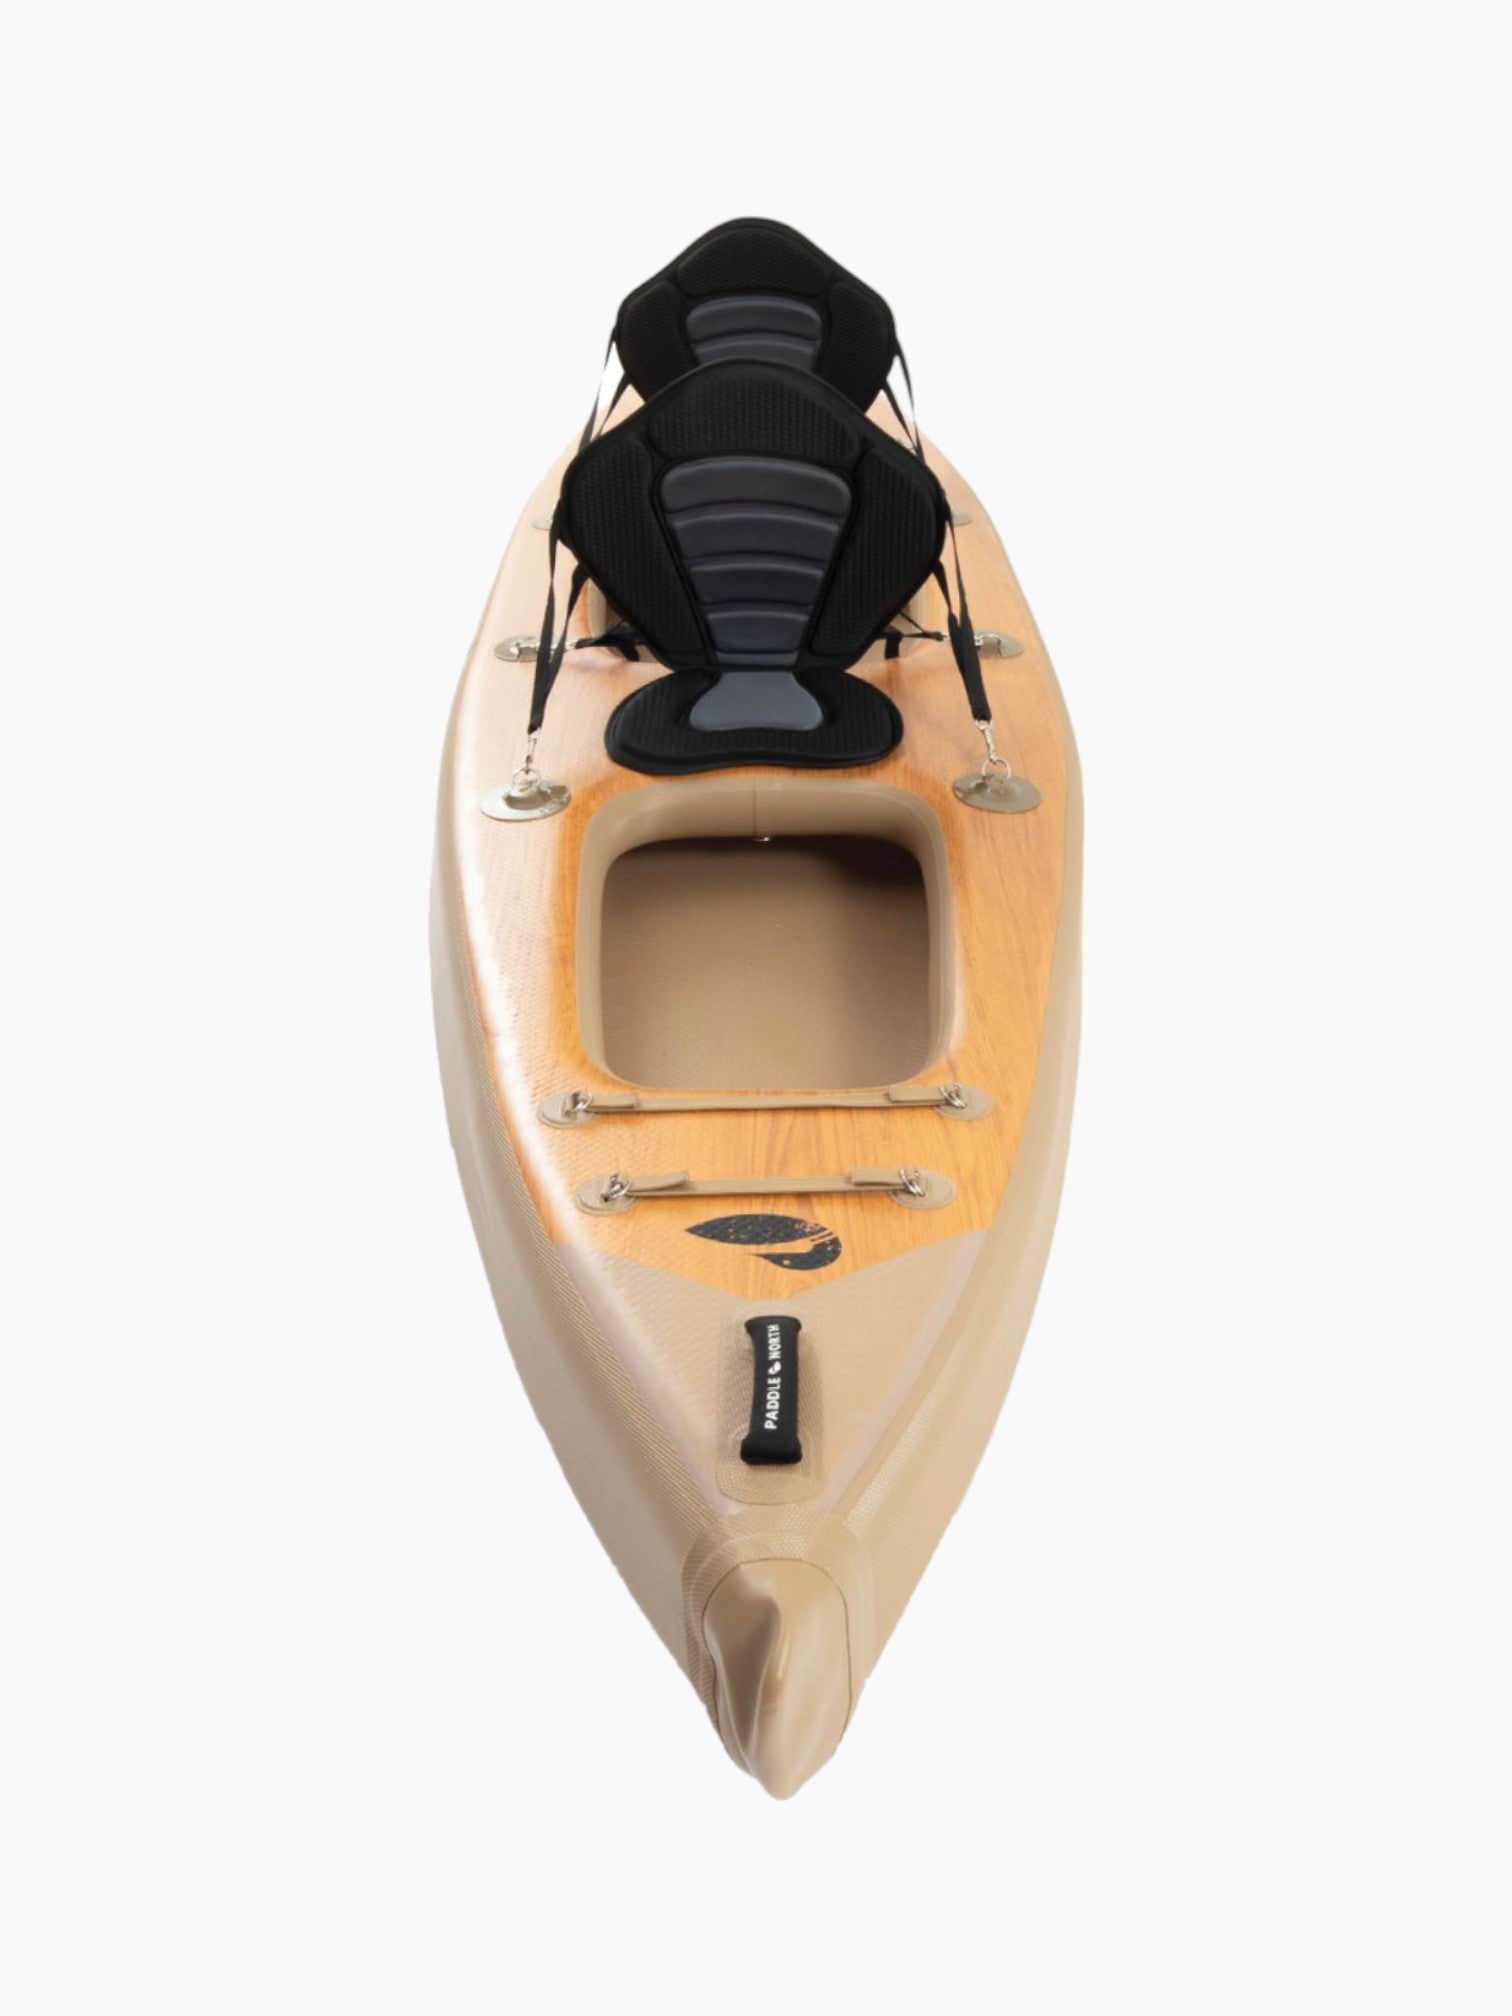 Front view of a double inflatable kayak with black seats.